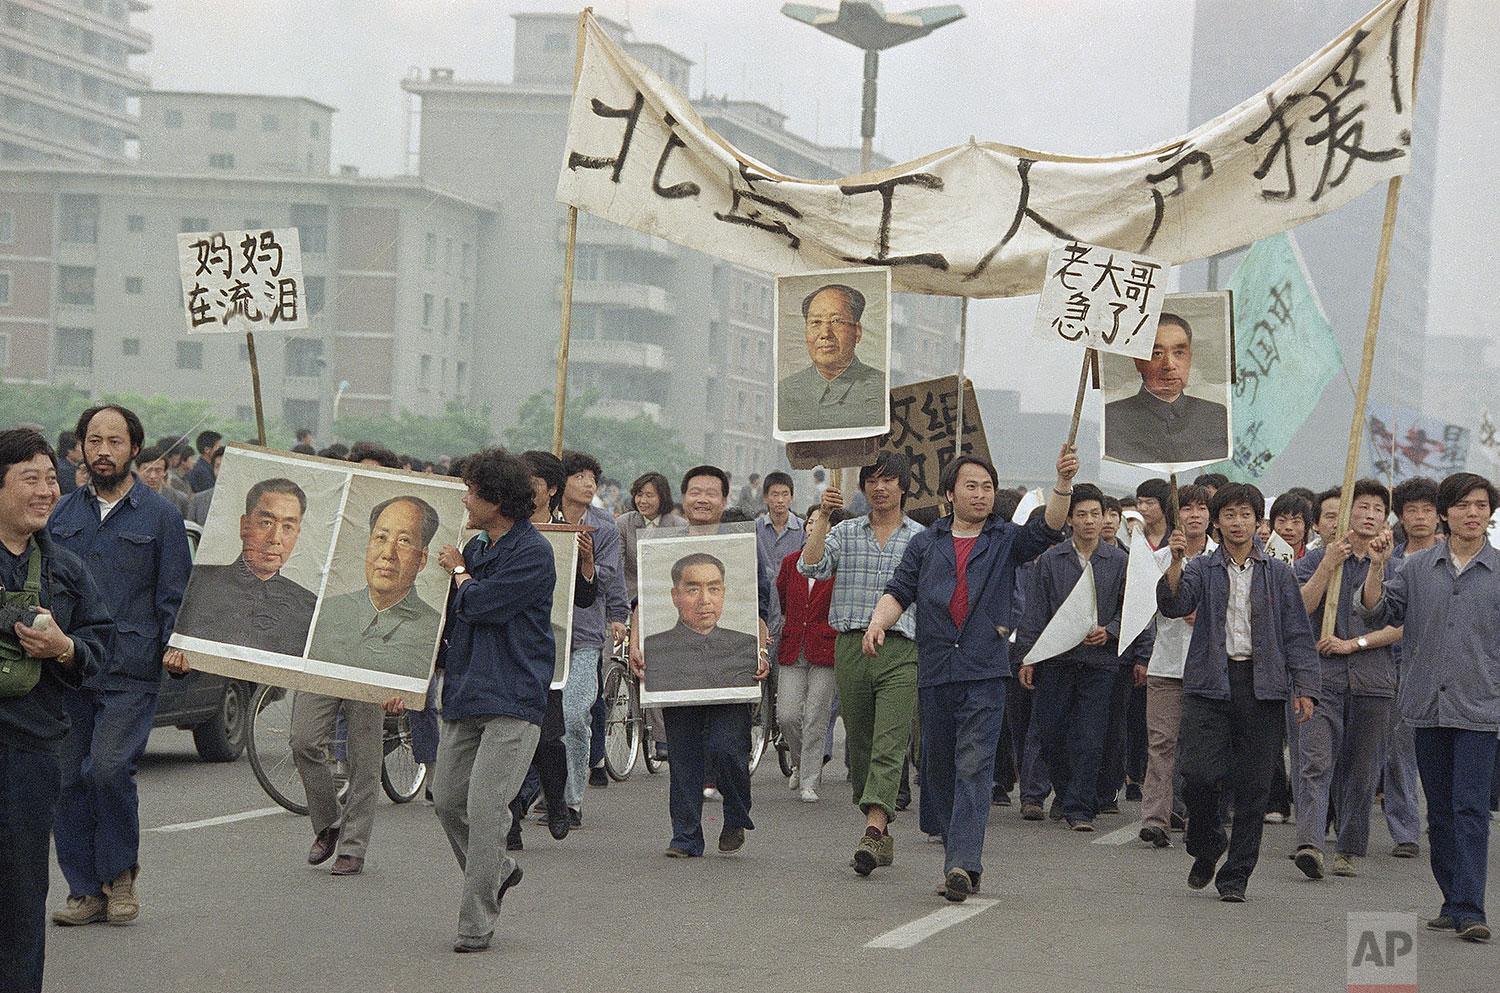  Pro Democracy demonstrators carry portraits of former Chinese rulers Mao Tse-Tung and Chou En-Lai as they march to join student strikers at Tiananmen Square, May 18, 1989, Beijing, China. (AP Photo/Sadayuki Mikami) 